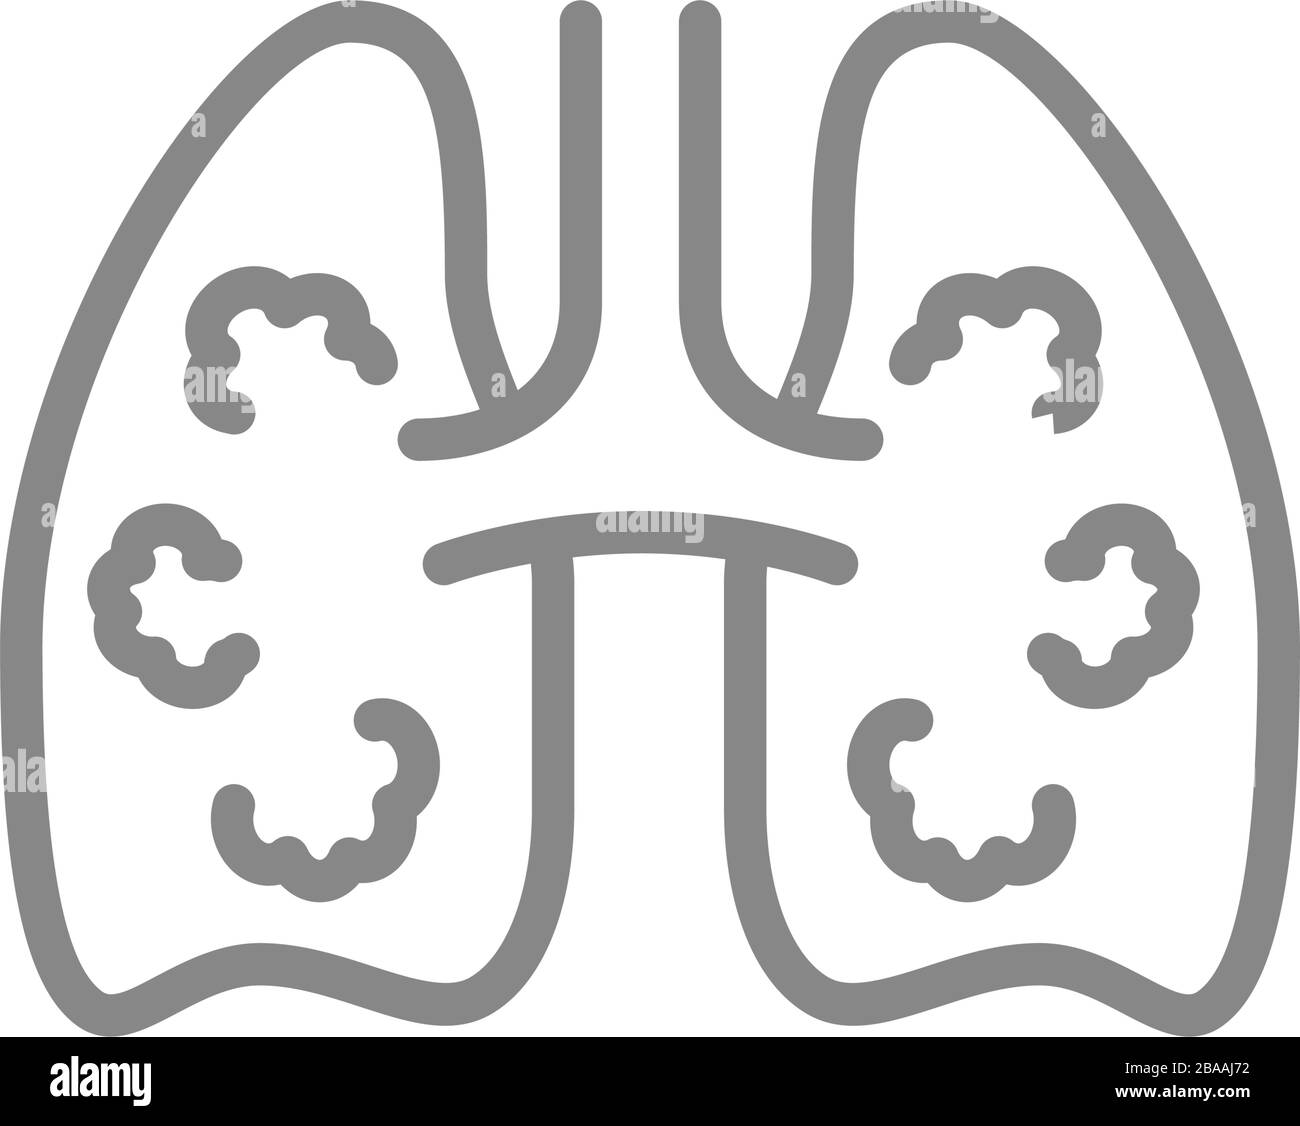 Lungs with tumors line icon. Lungs cancer, diseases internal organ, tuberculosis symbol Stock Vector